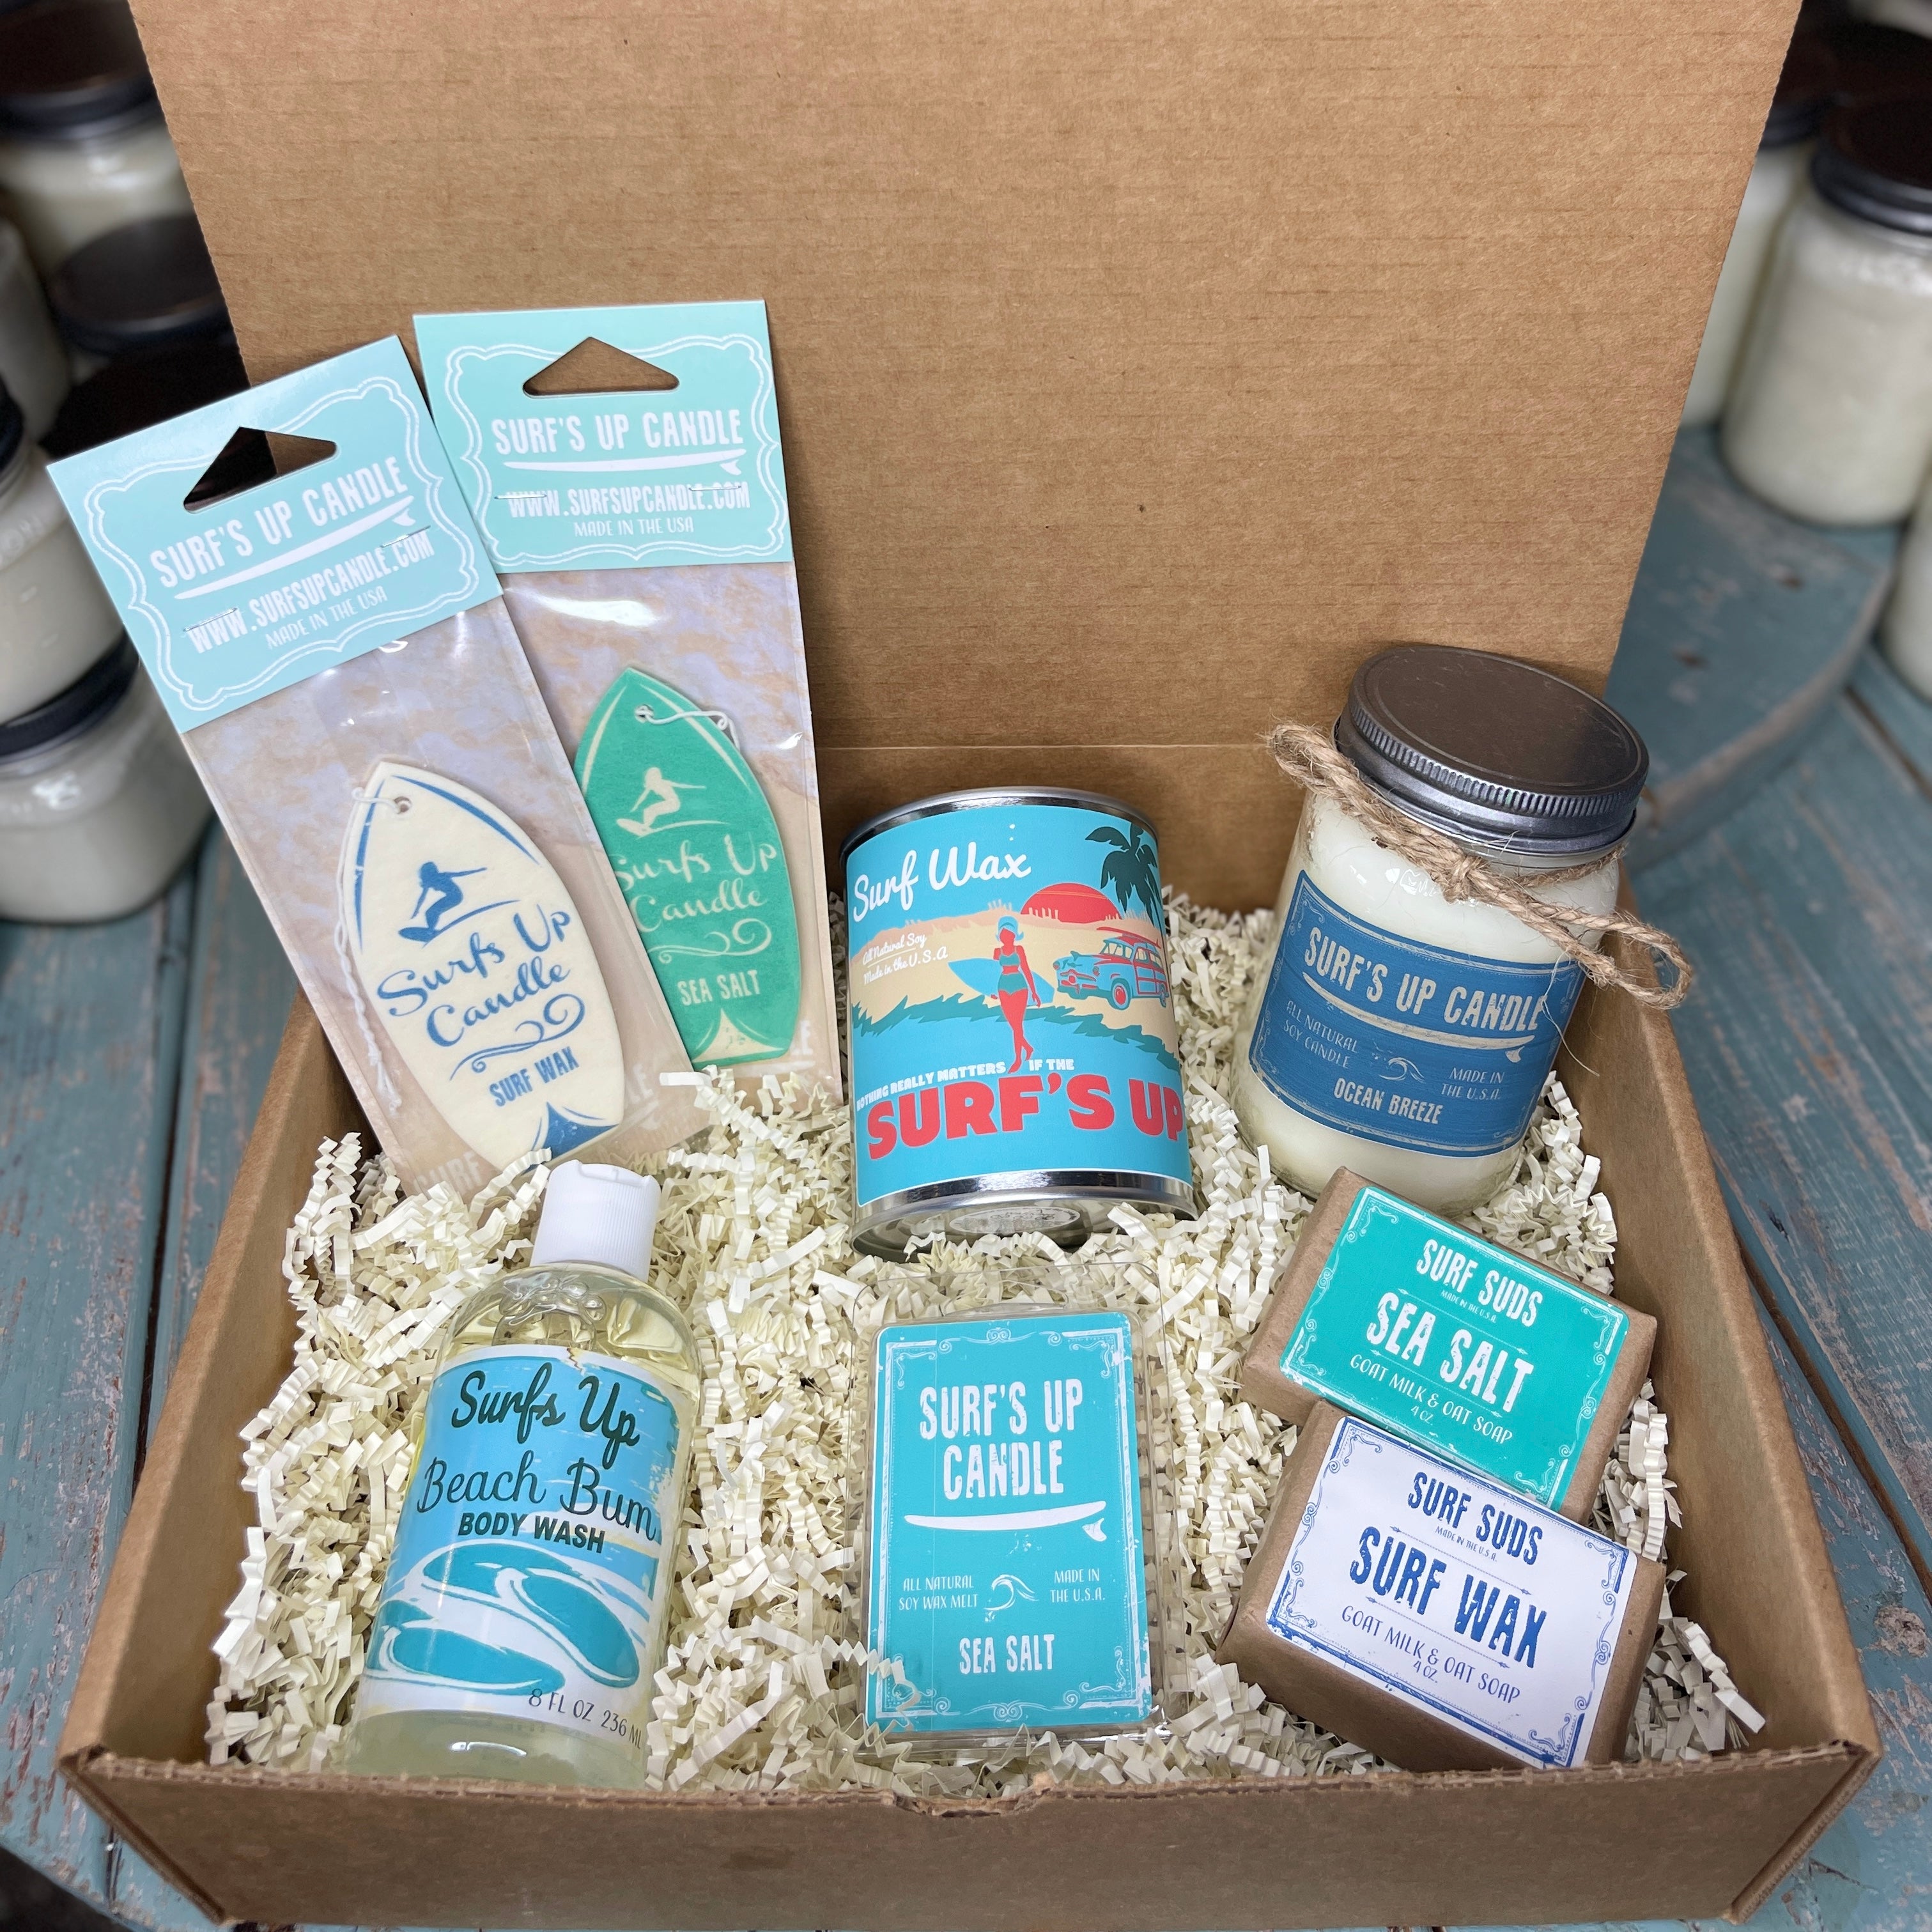 Best Sellers Gift Box